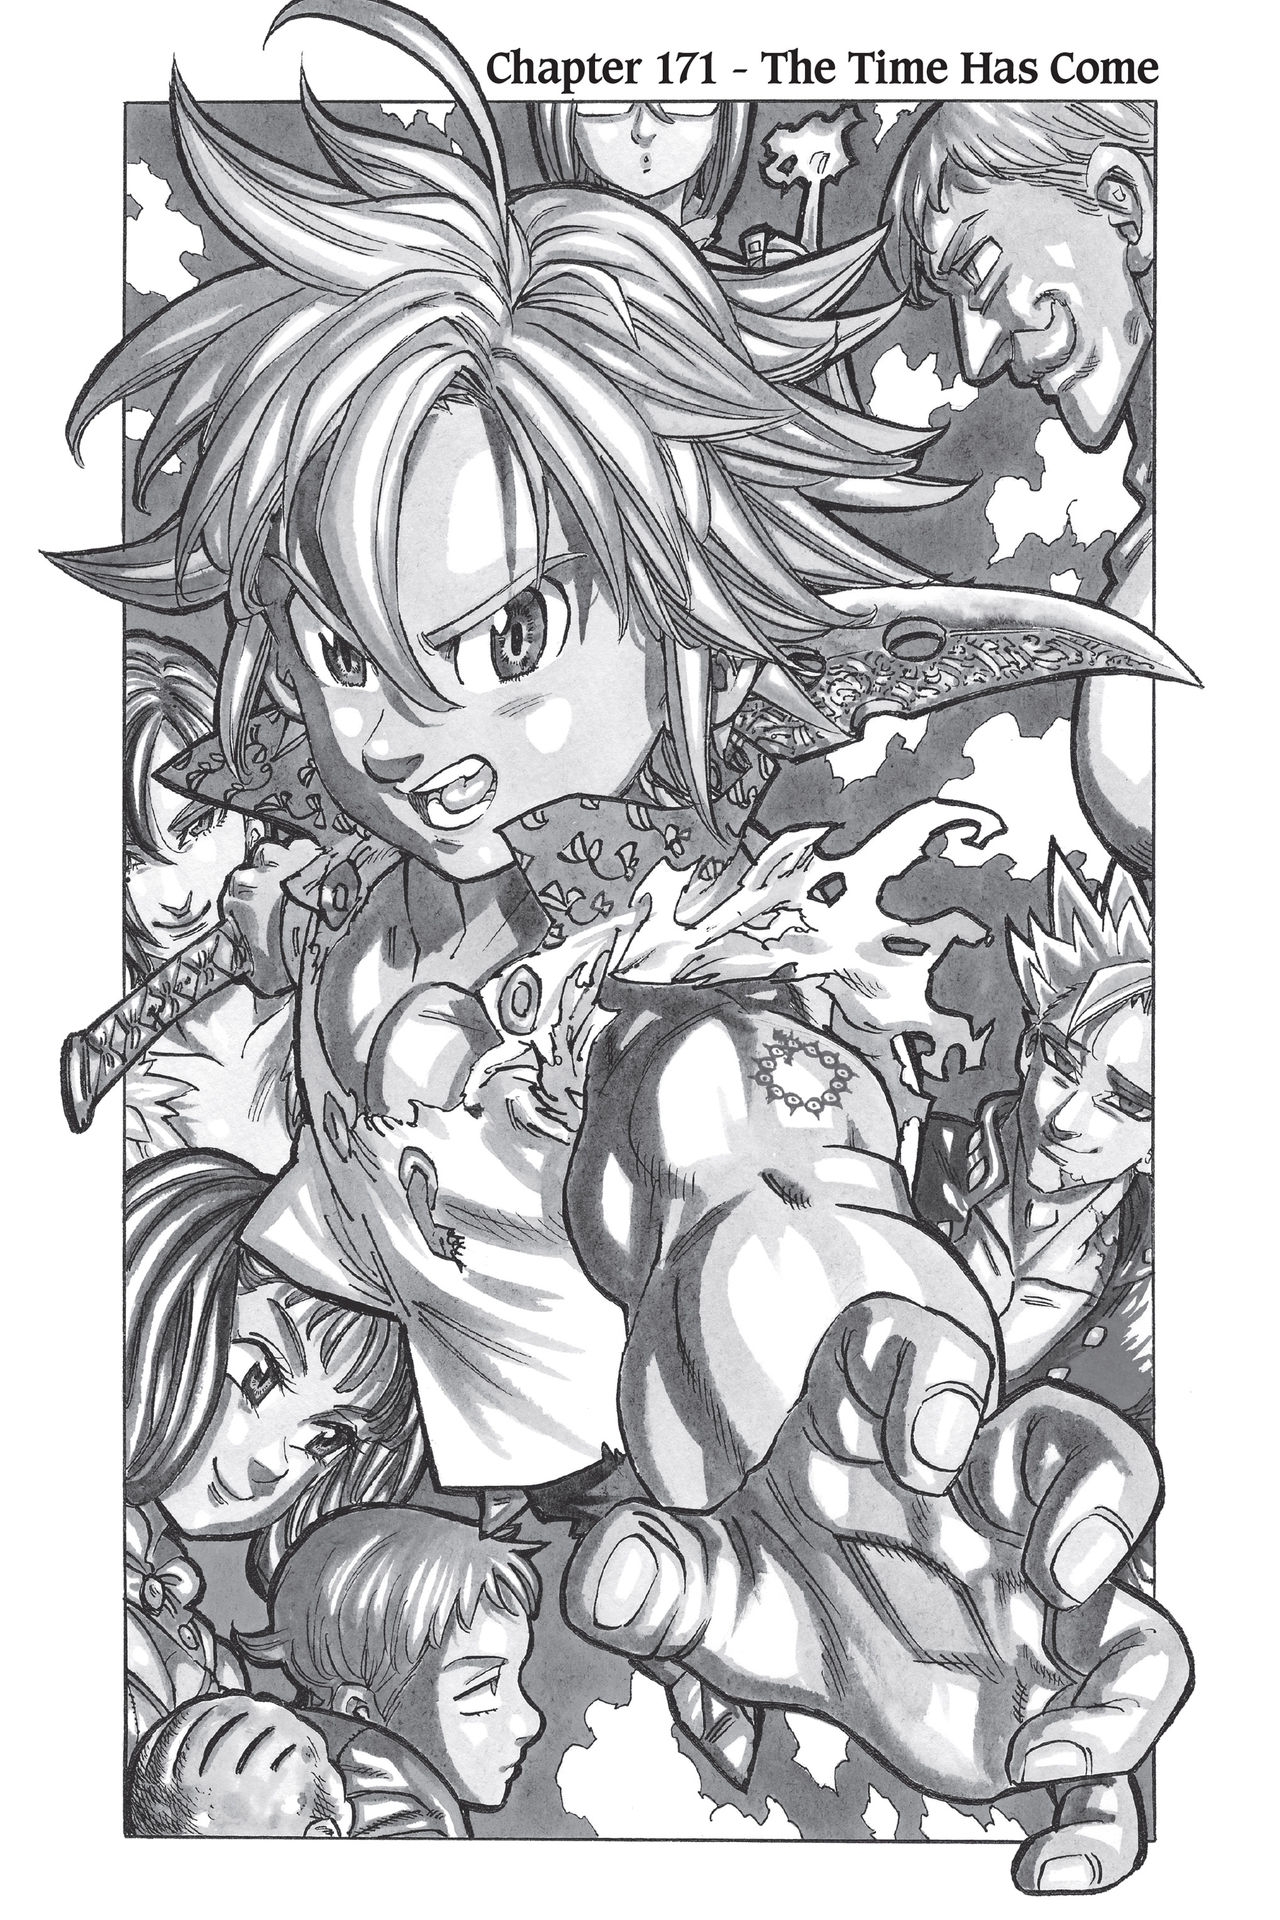 The Seven Deadly Sins (Covers & Chapter Title Cards) 378